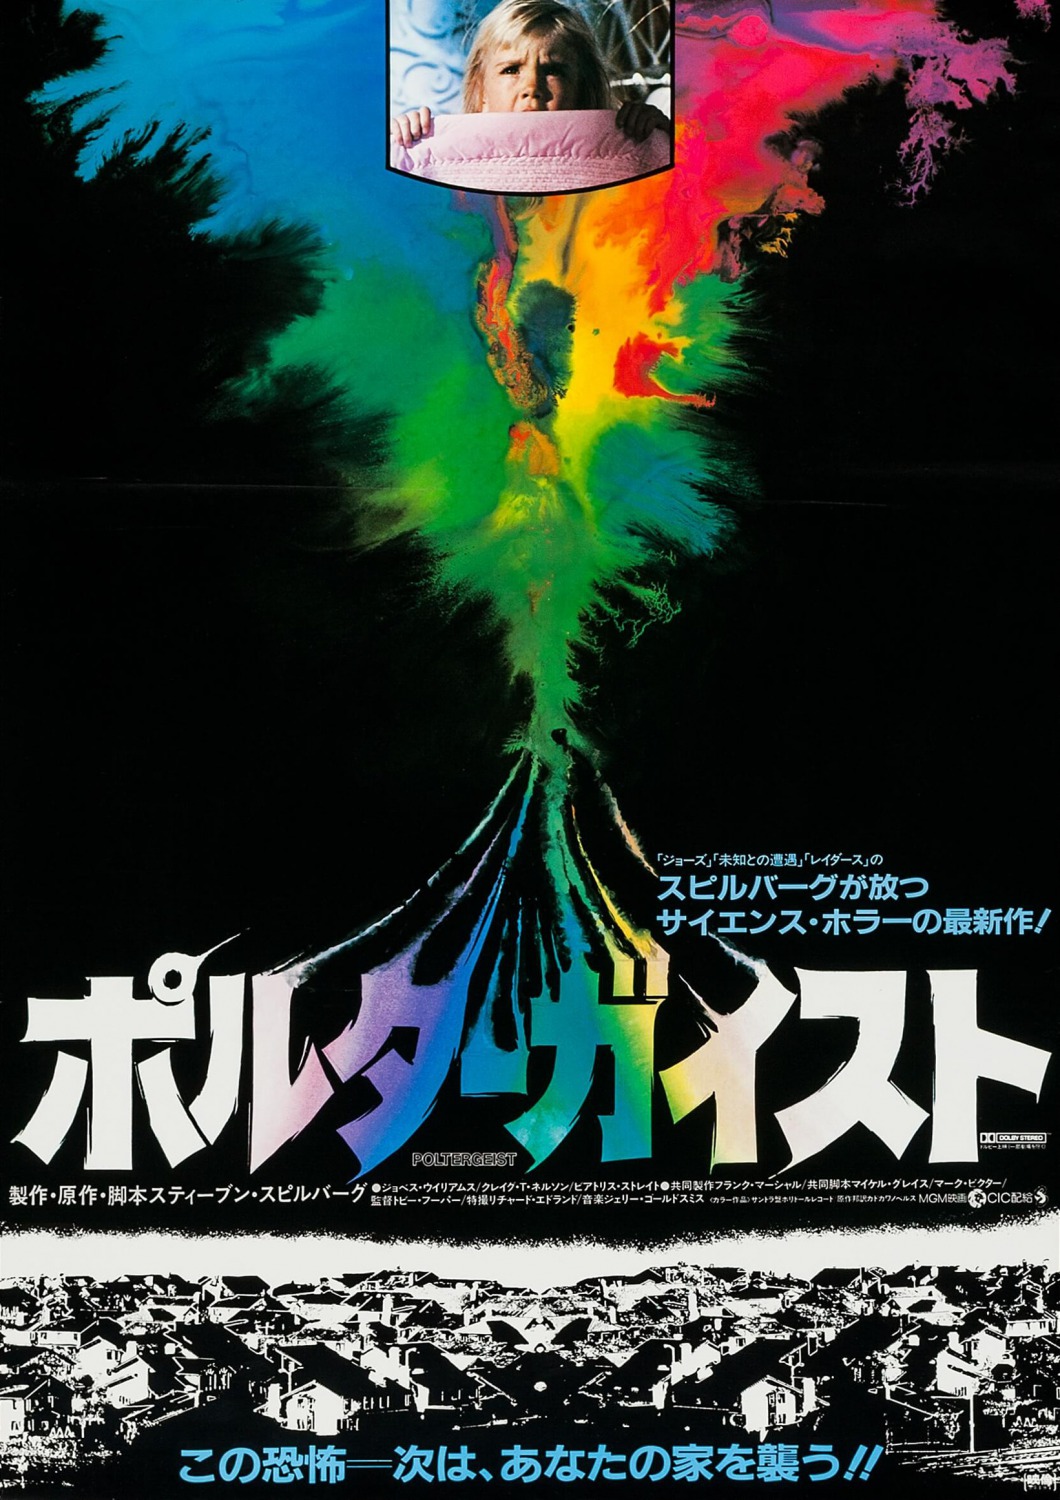 Extra Large Movie Poster Image for Poltergeist (#4 of 5)